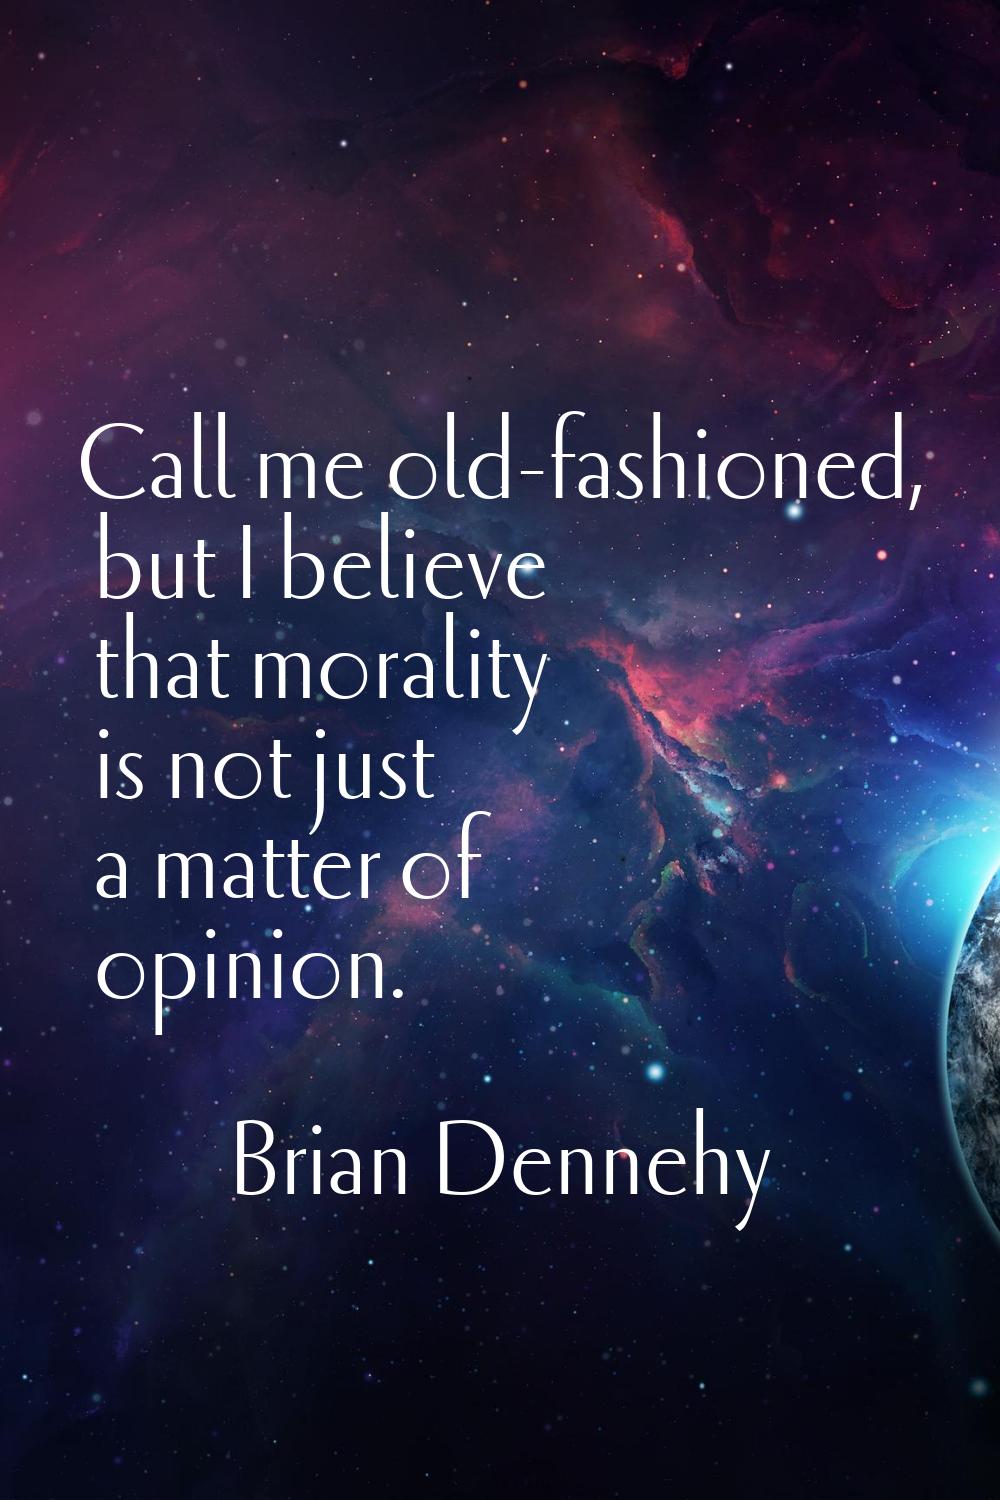 Call me old-fashioned, but I believe that morality is not just a matter of opinion.